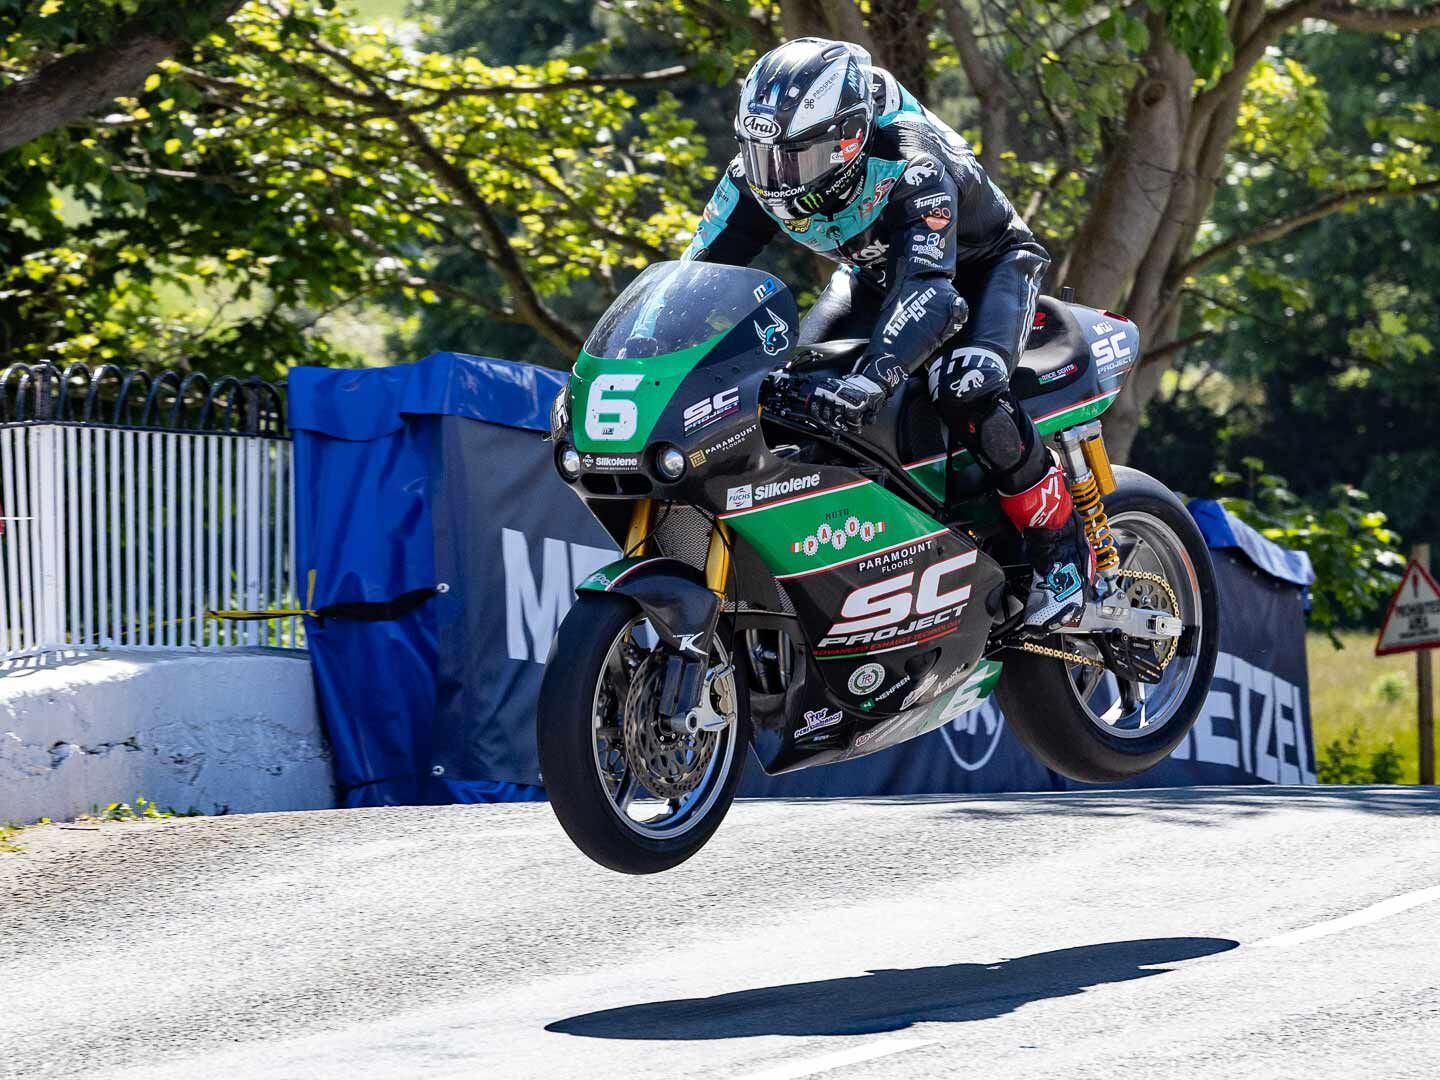 As if competing against the bike, as well as the mountain course, Michael Dunlop won the first Supertwin event by 27 seconds.